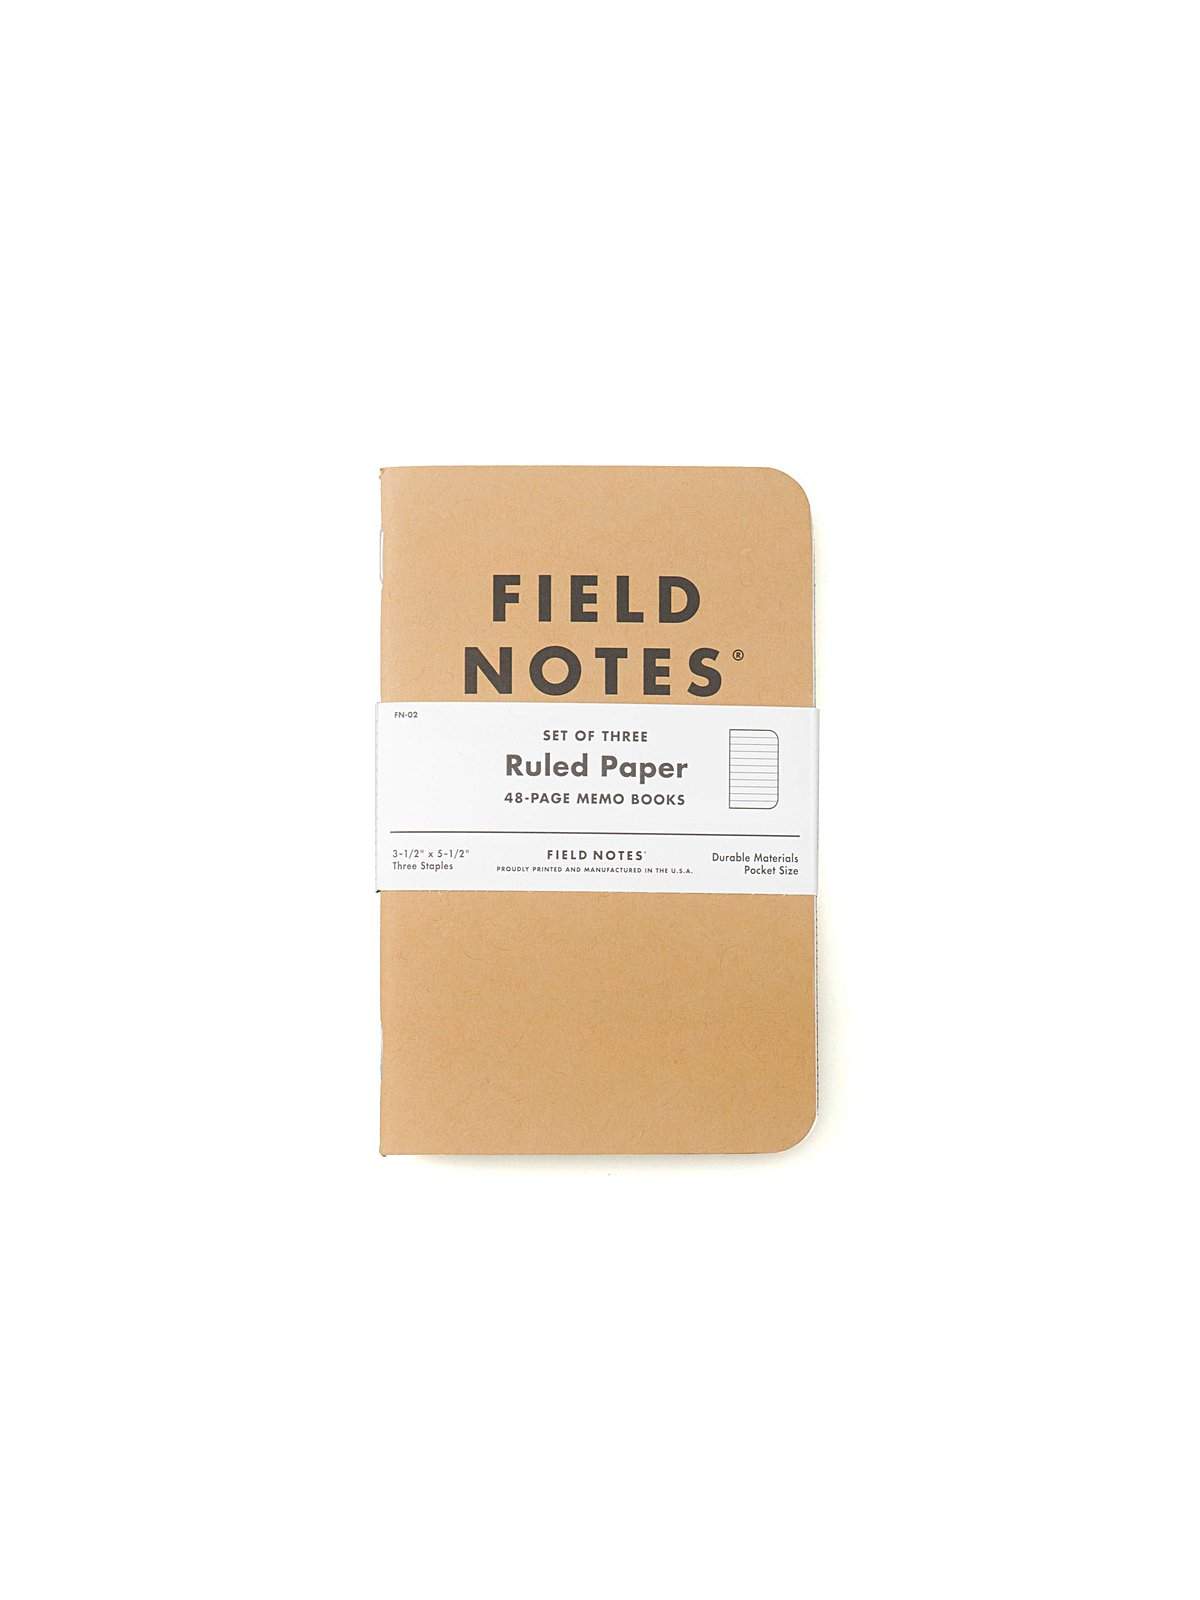 Field Notes Original Kraft 3 Pack Ruled Paper - MORE by Morello Indonesia